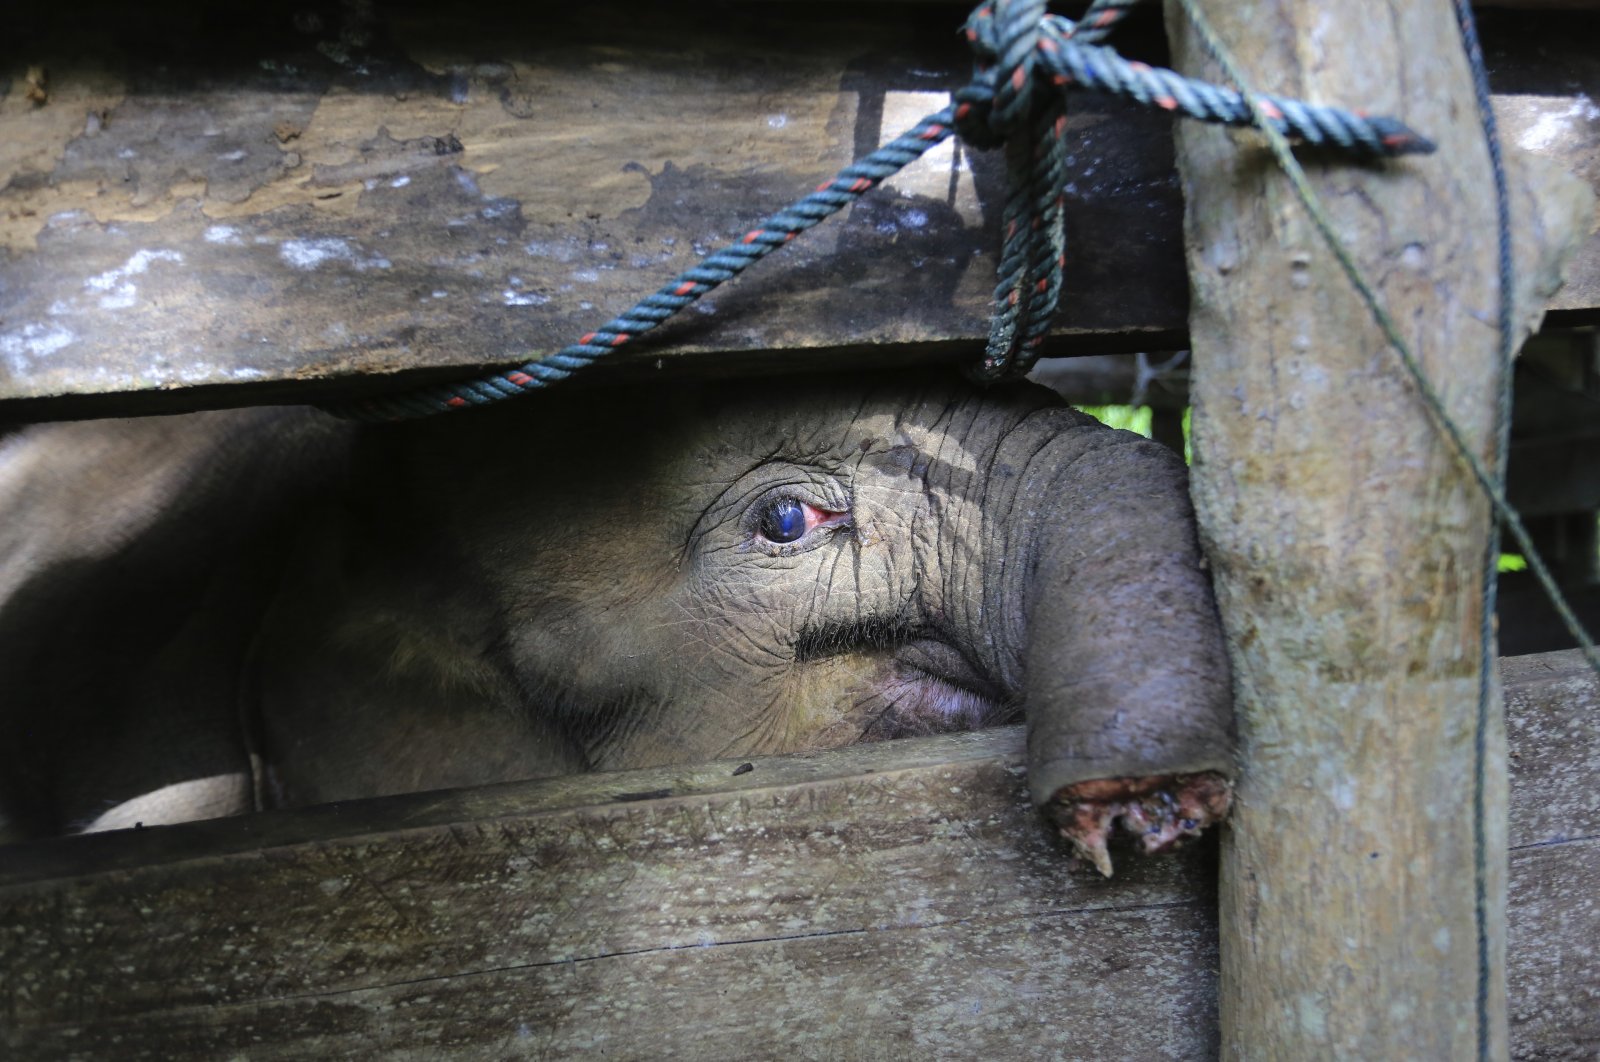 A Sumatran elephant calf that lost half of its trunk, is treated at an elephant conservation center in Saree, Aceh Besar, Indonesia, Nov. 15, 2021. (AP Photo)